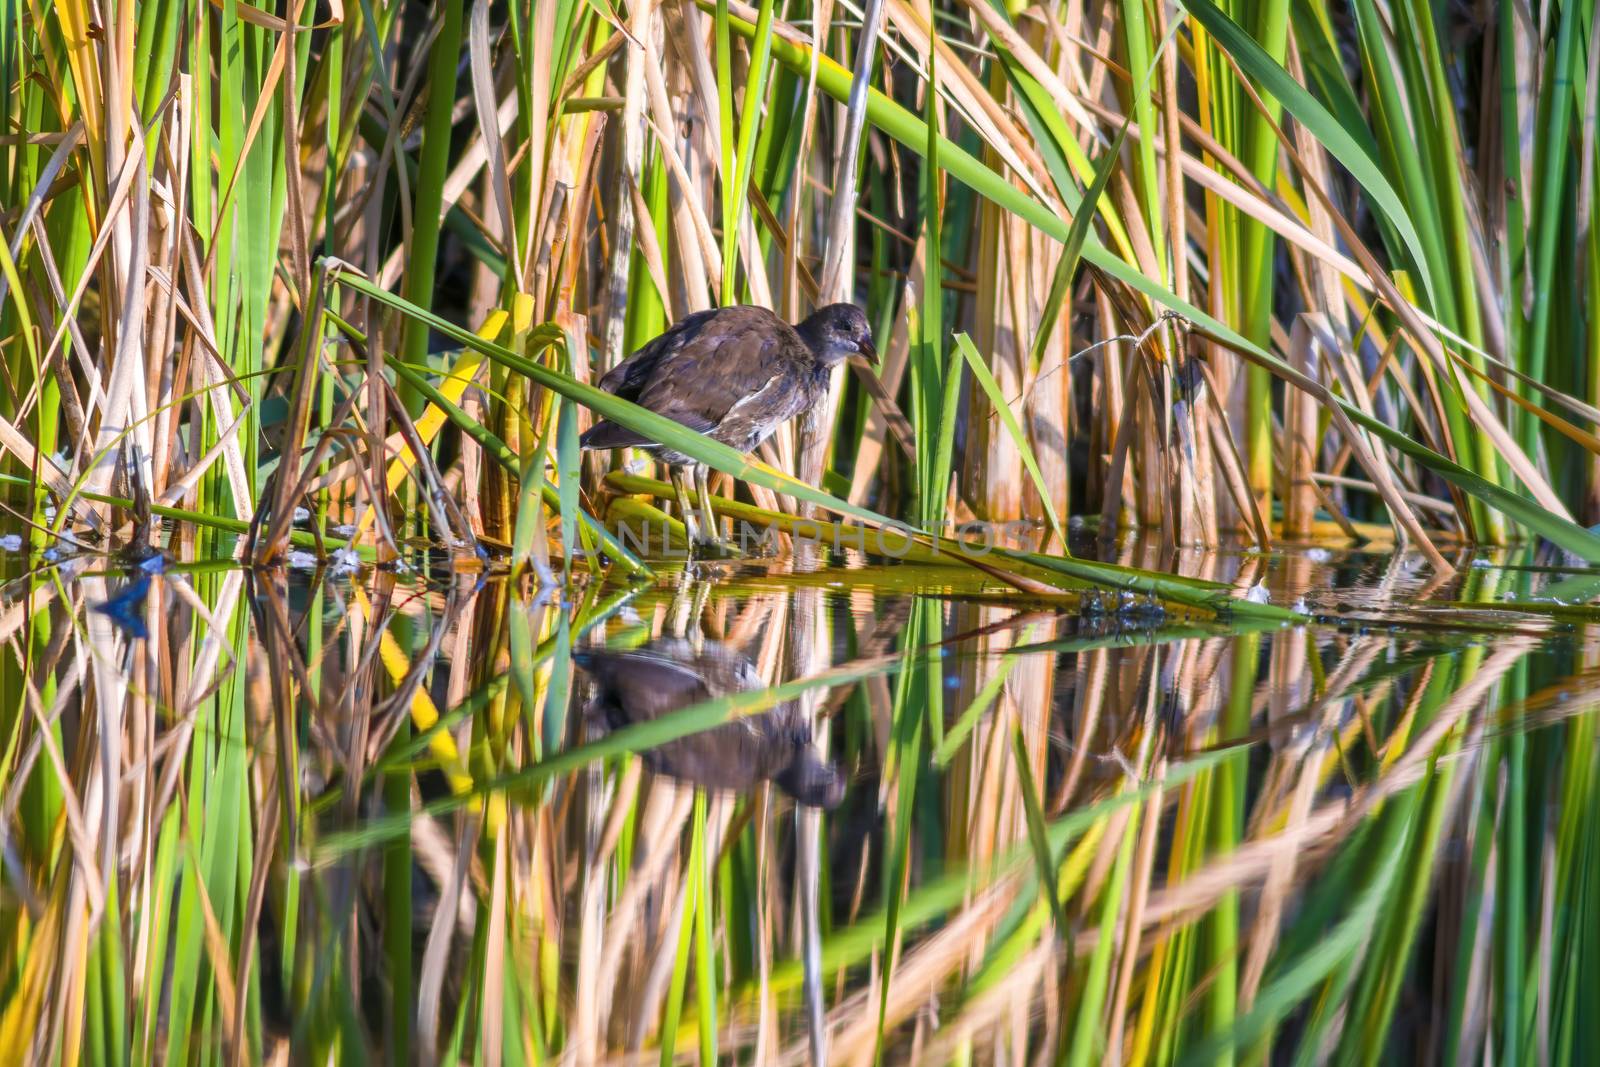 a little young bird on a pond in nature